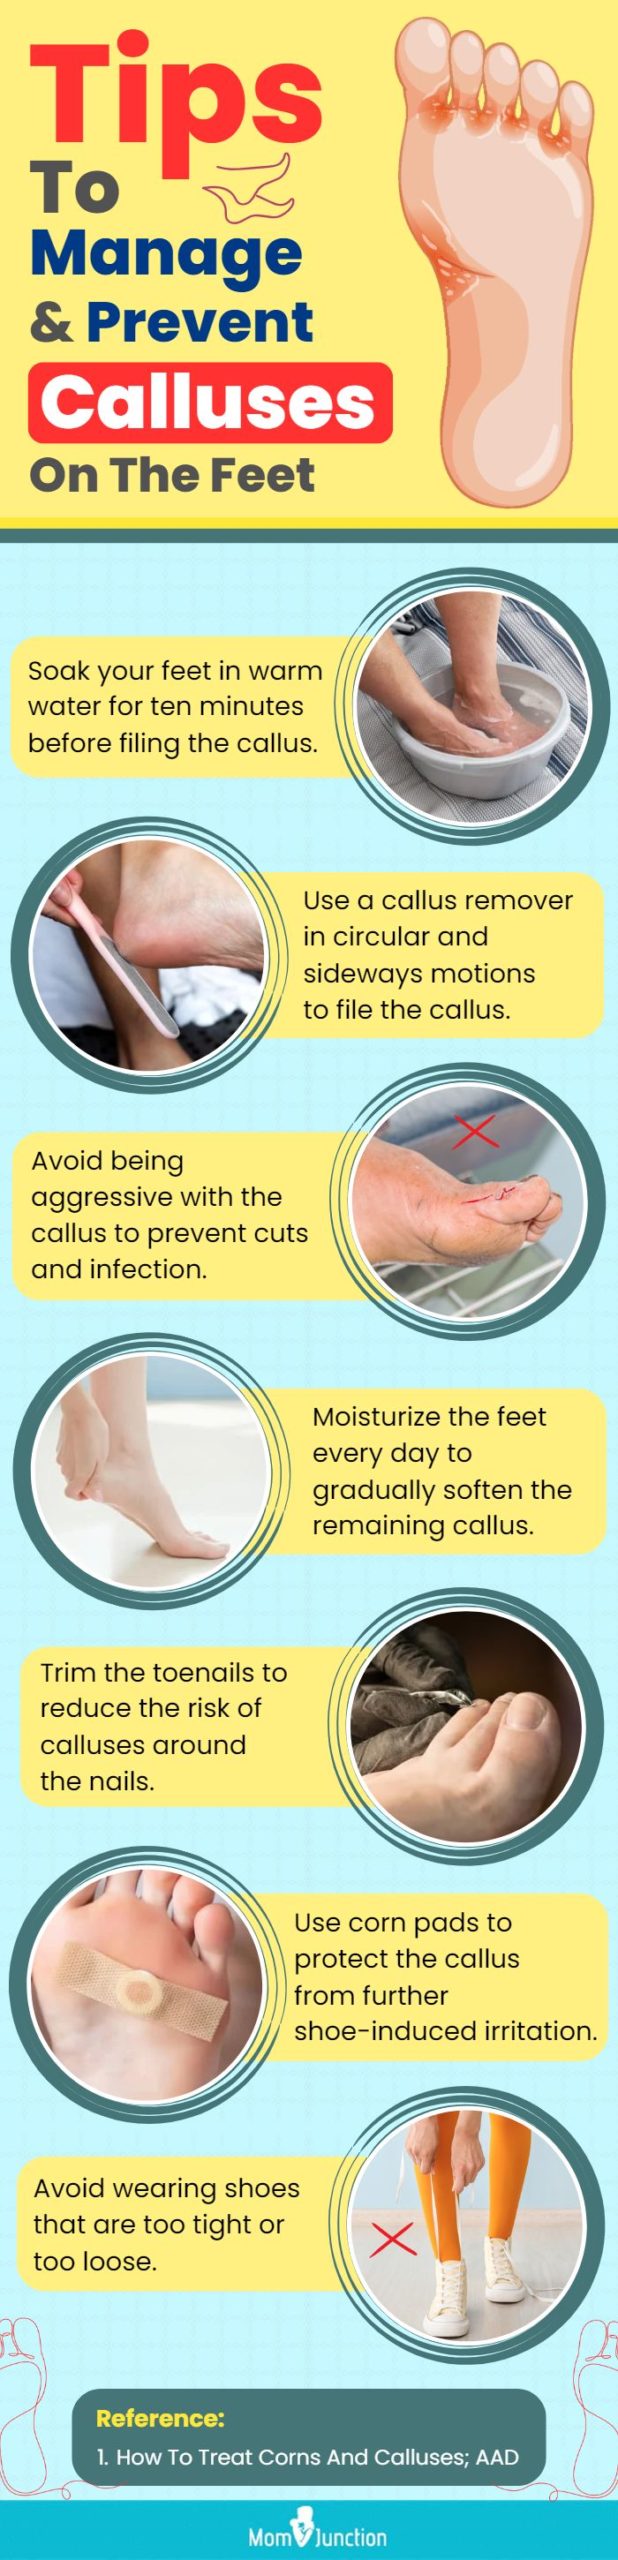 Tips To Manage And Prevent Calluses On The Feet (infographic)